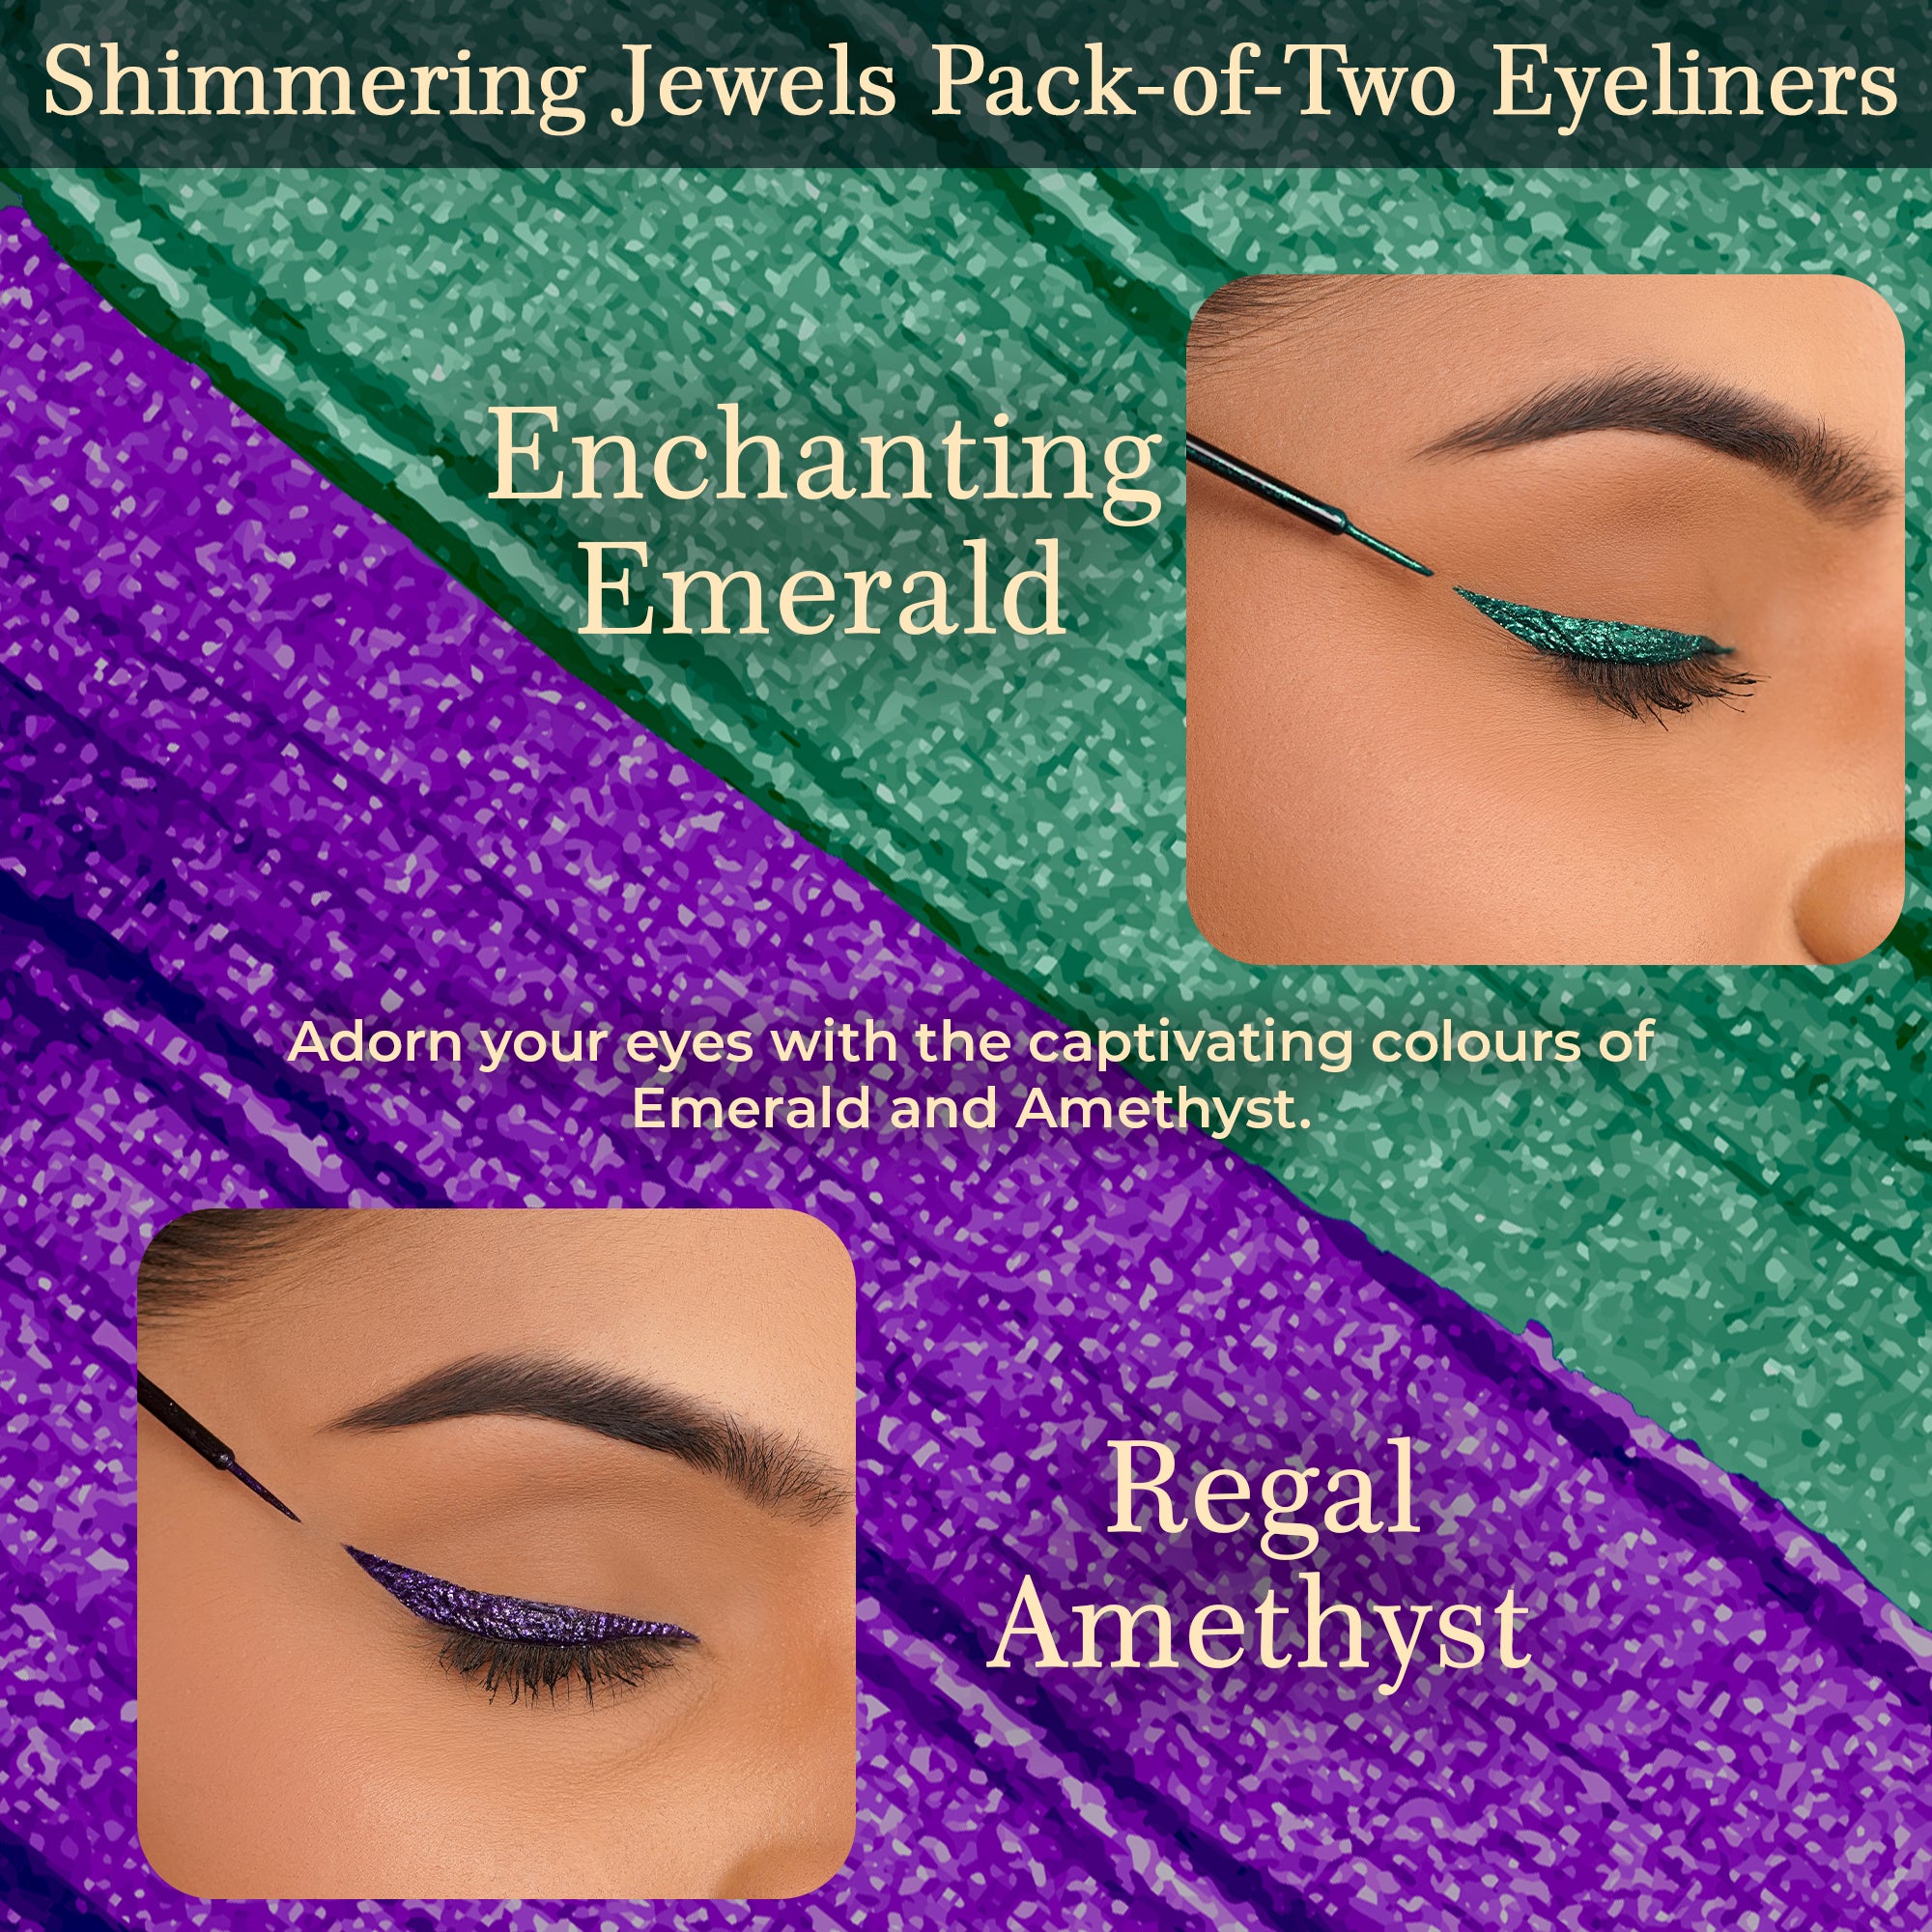 Shimmering Jewels Pack-of-Two Eyeliners